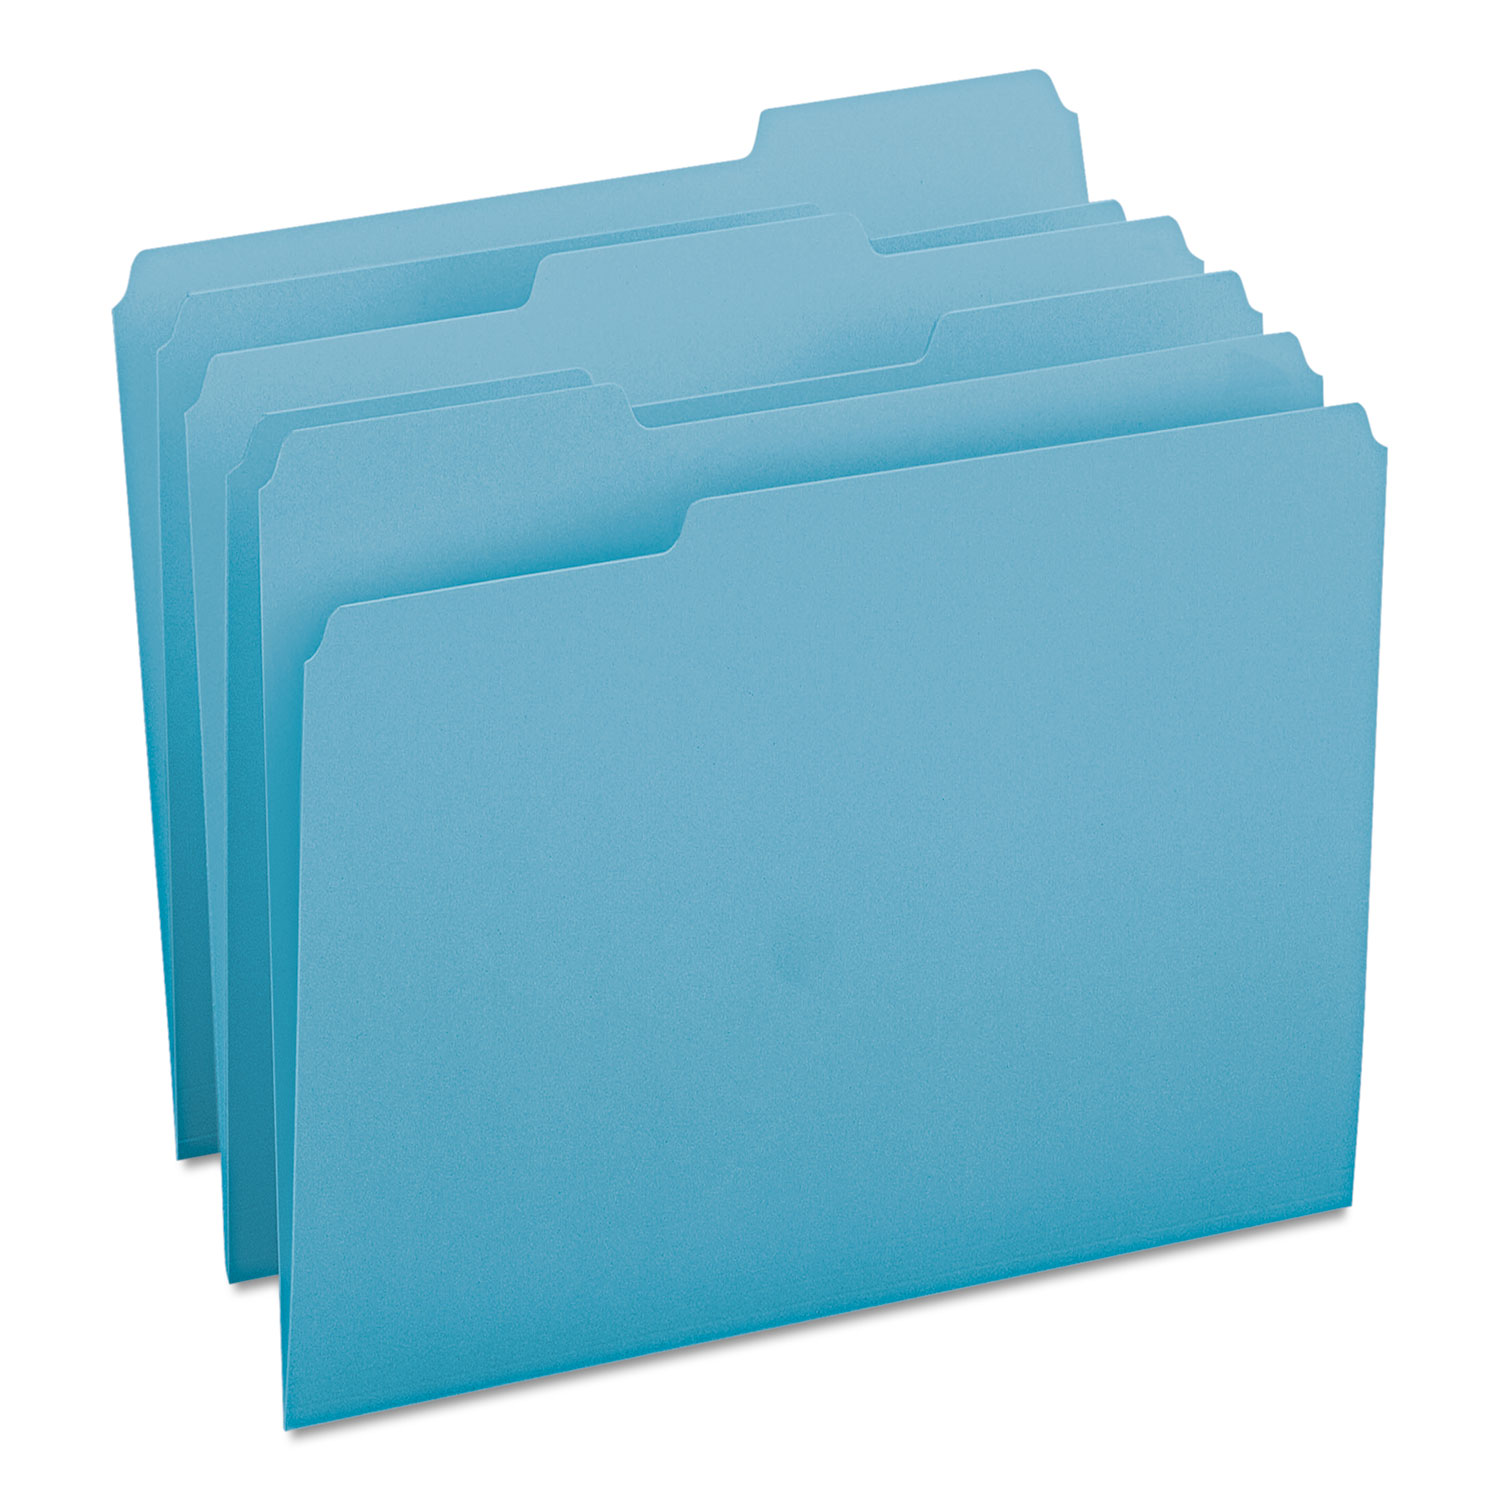  Smead 13143 Colored File Folders, 1/3-Cut Tabs, Letter Size, Teal, 100/Box (SMD13143) 